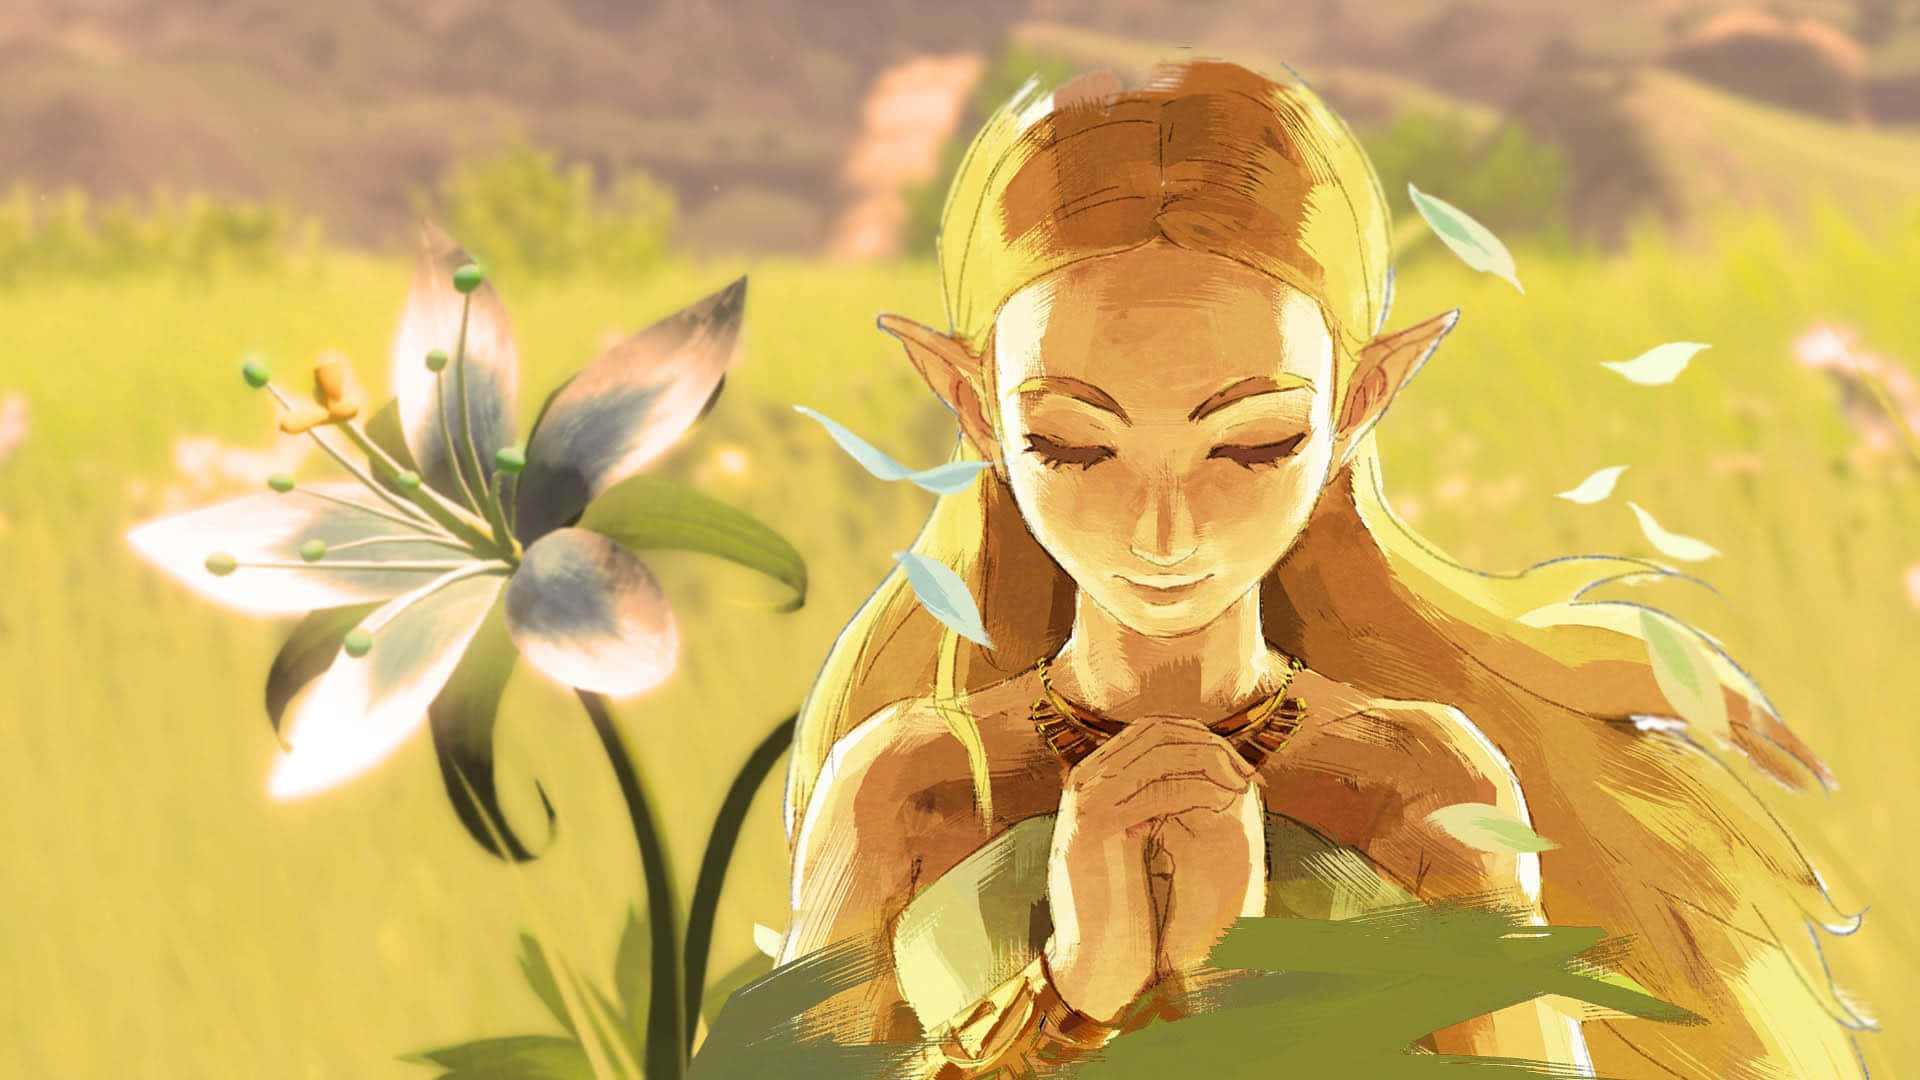 Explore the mysterious world of Hyrule in The Legend of Zelda